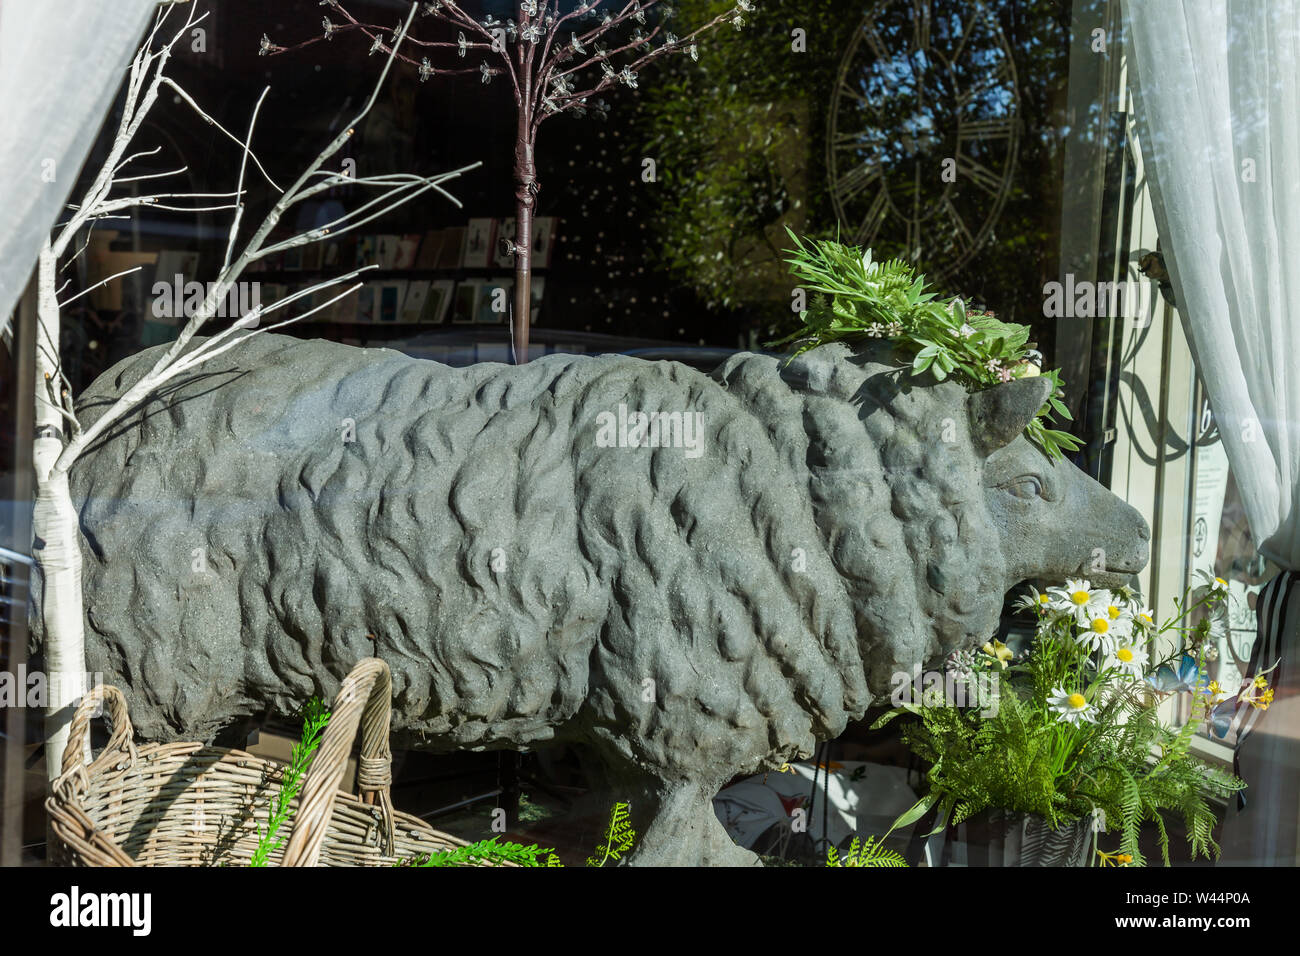 A concrete sheep statue stands in a store window in Roanoke, Indiana, USA. Stock Photo